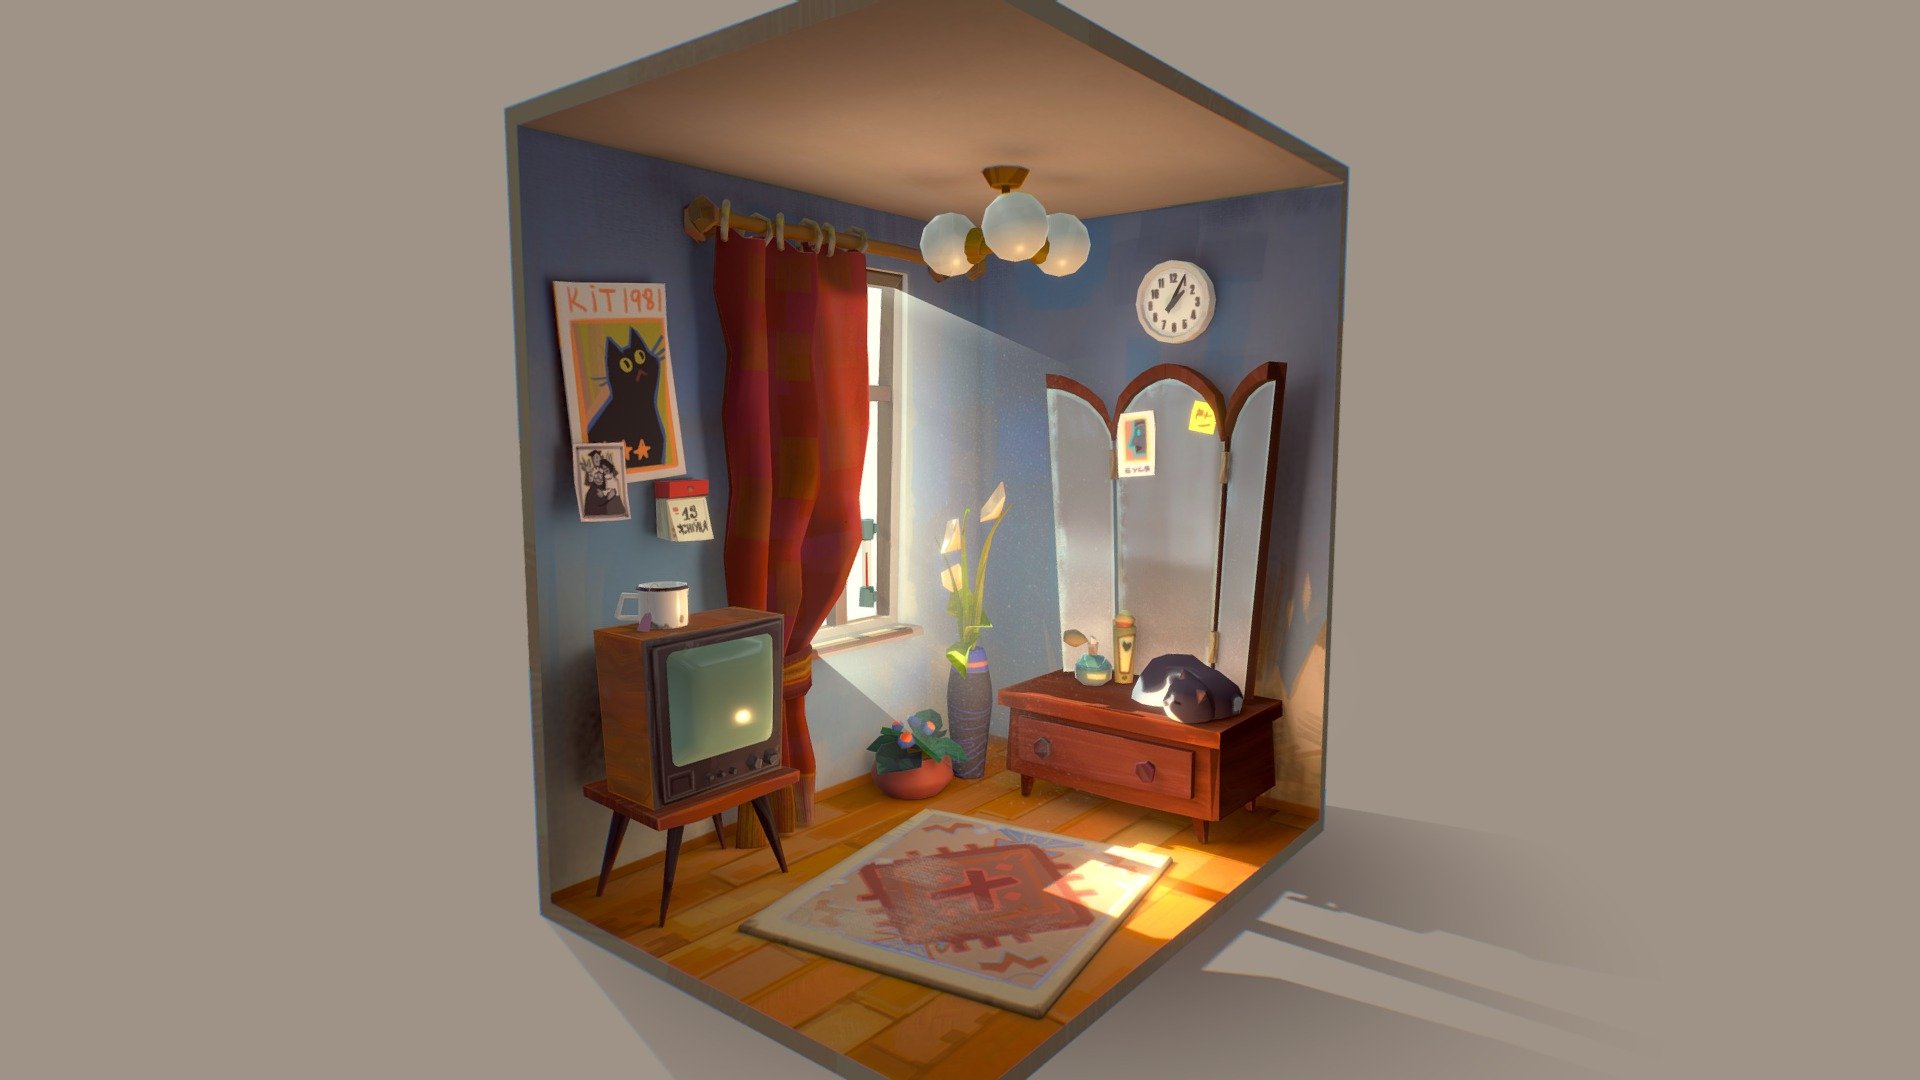 first try at modeling some small cartoonish enviroment. it's a mix of a babushkas' dacha and a friends' bedroom 3d model